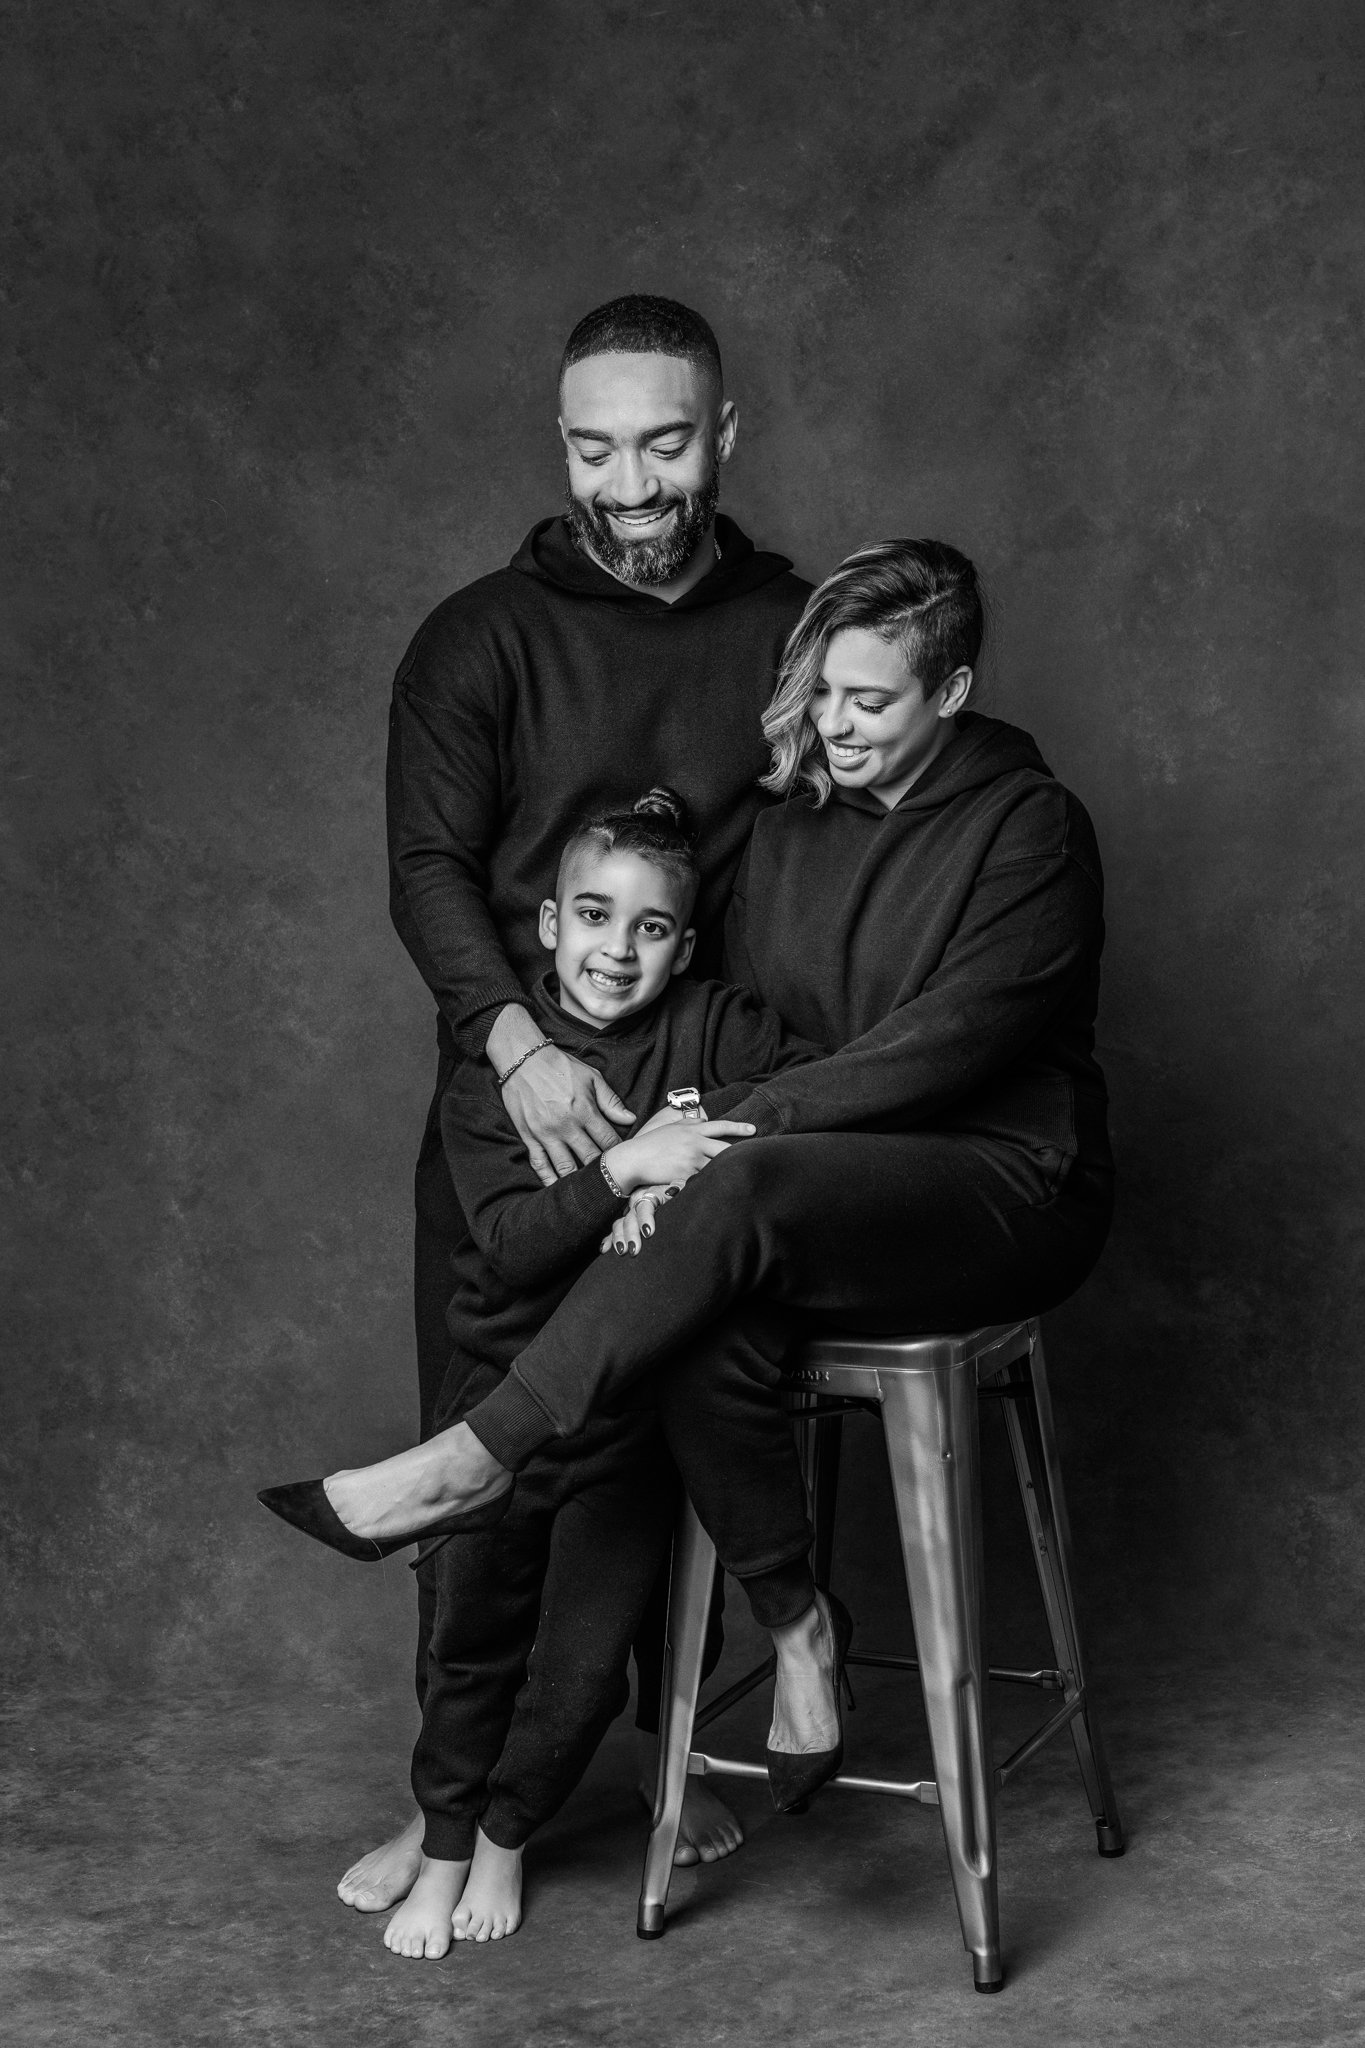  Family of three portraits with a mother and father and child by Nicole Hawkins Photography. black #NicoleHawkinsPhotograaphy #NicoleHawkinsFamilies #Modernfamilypictures #studioportraits #matchingfamilyoutfits #NJphotographer 